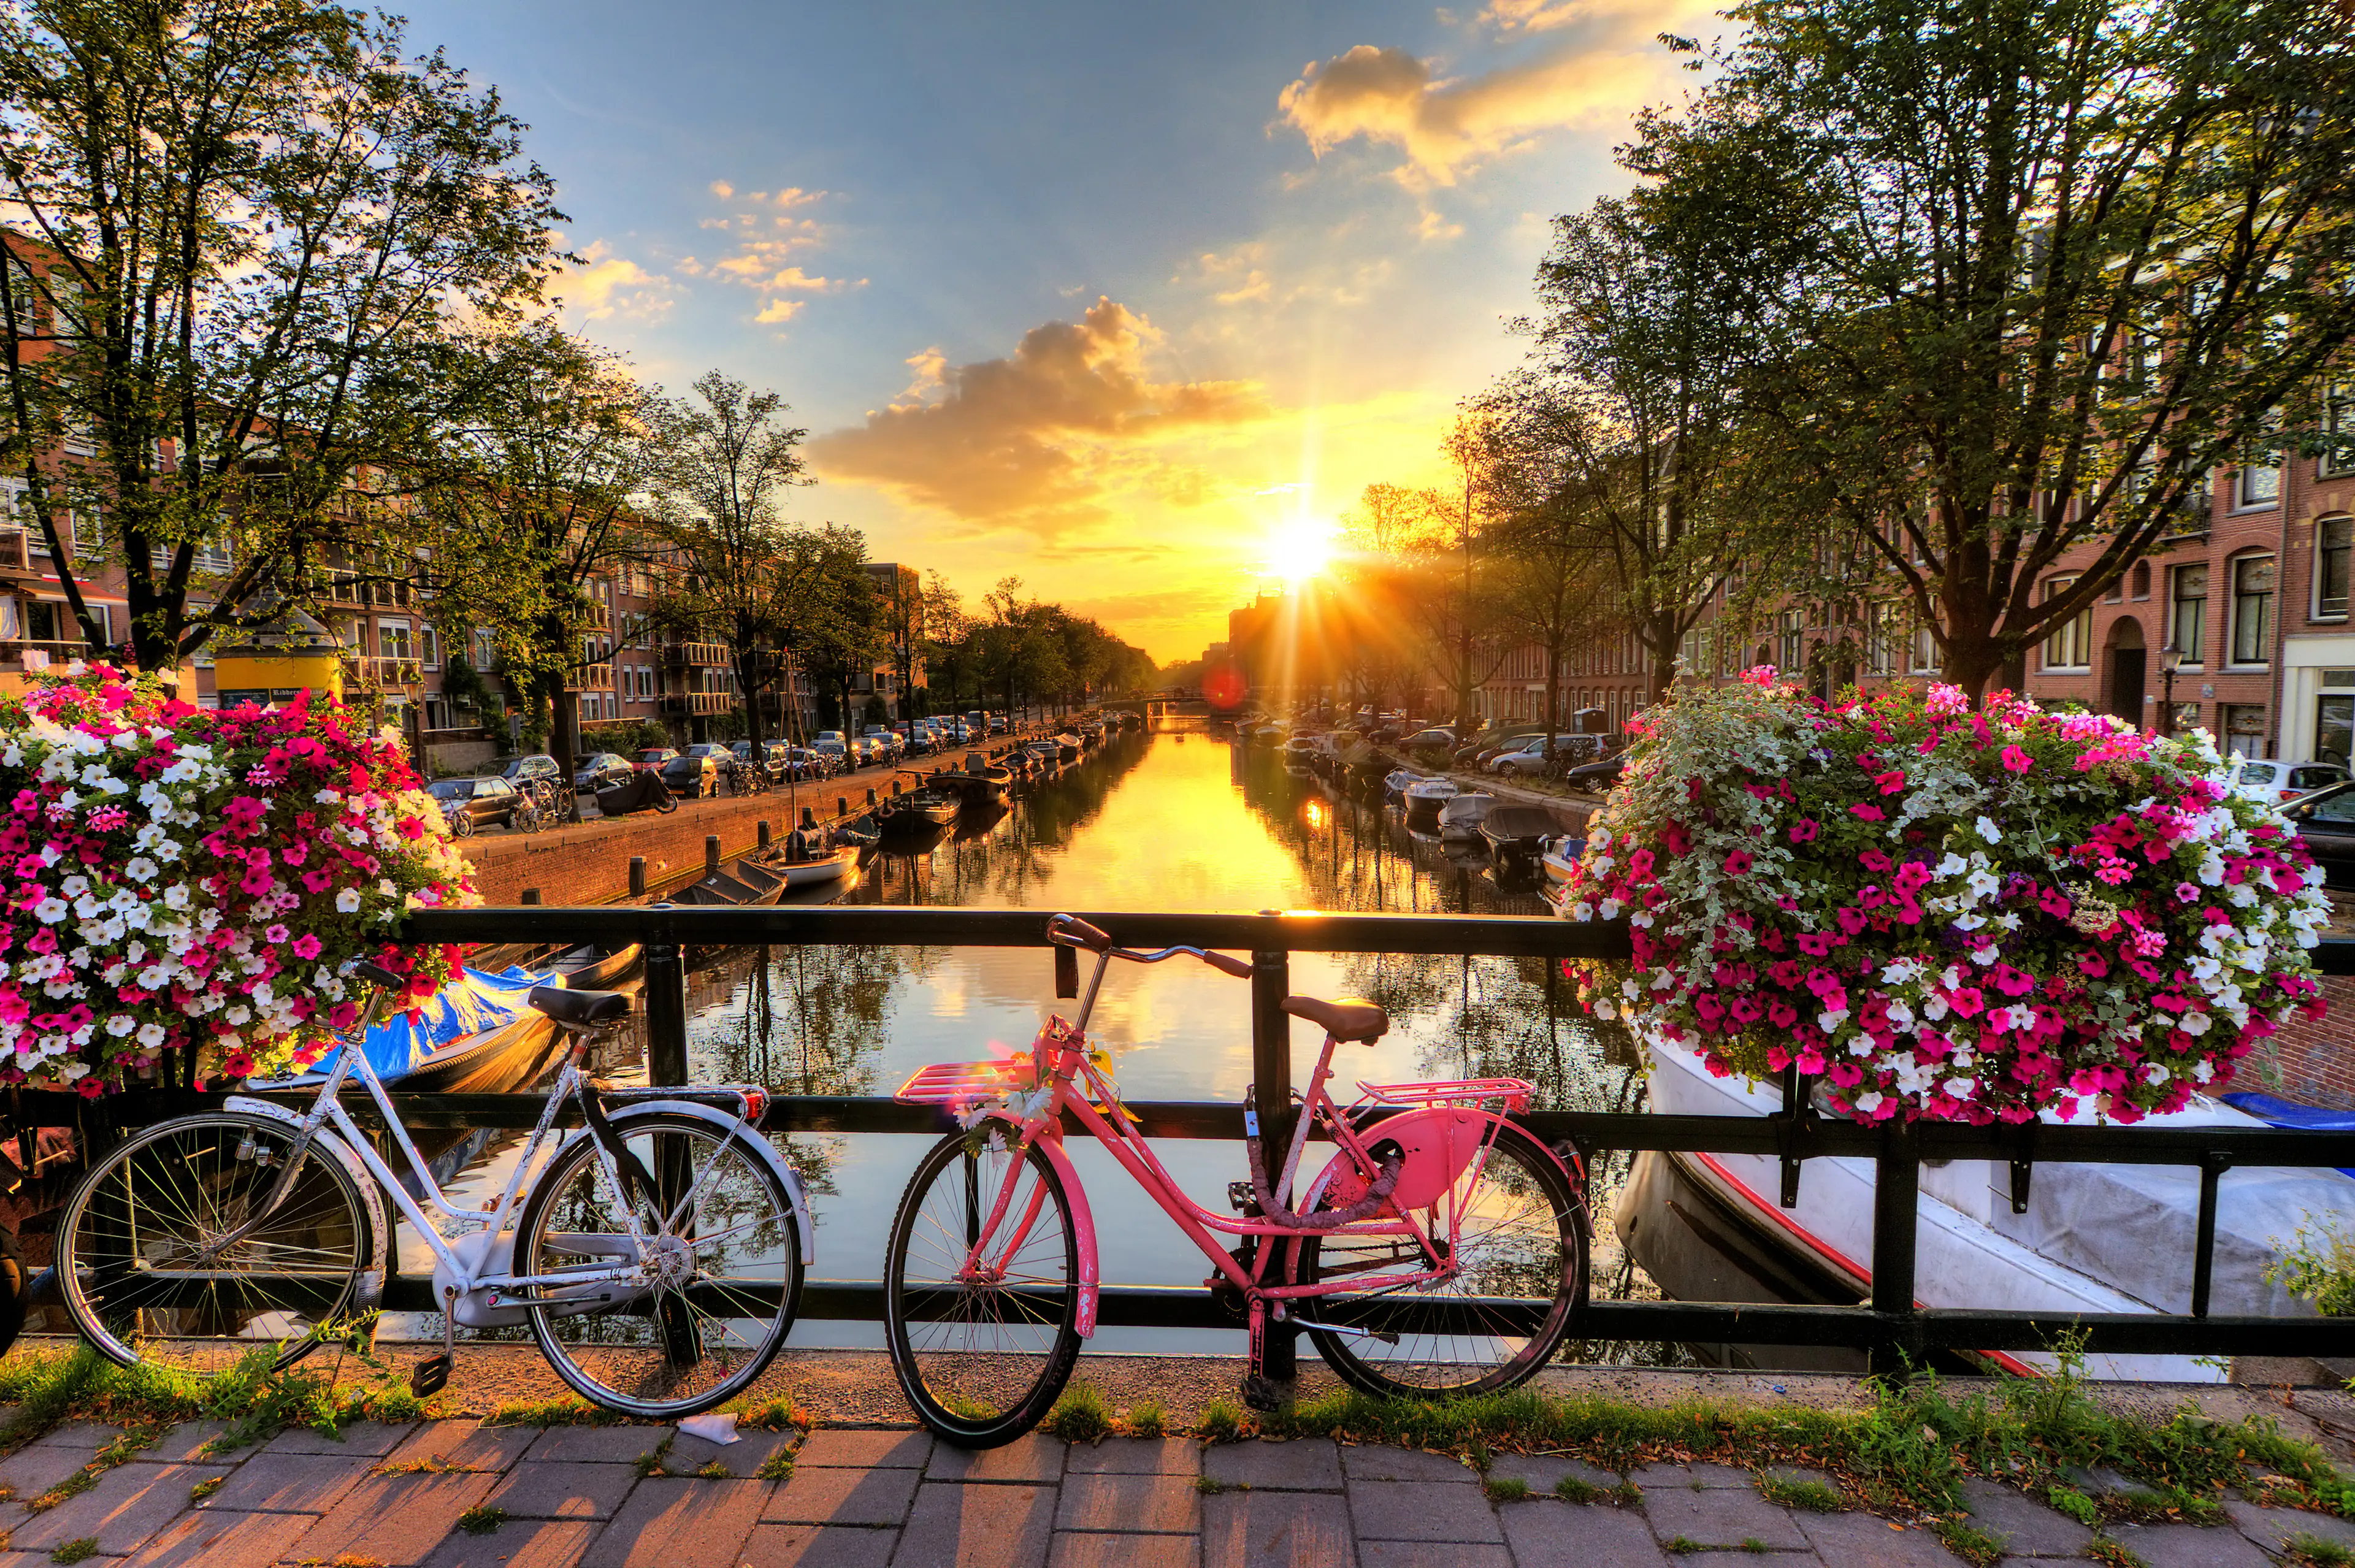 1-Day Offbeat Outdoor Relaxation Itinerary in Amsterdam